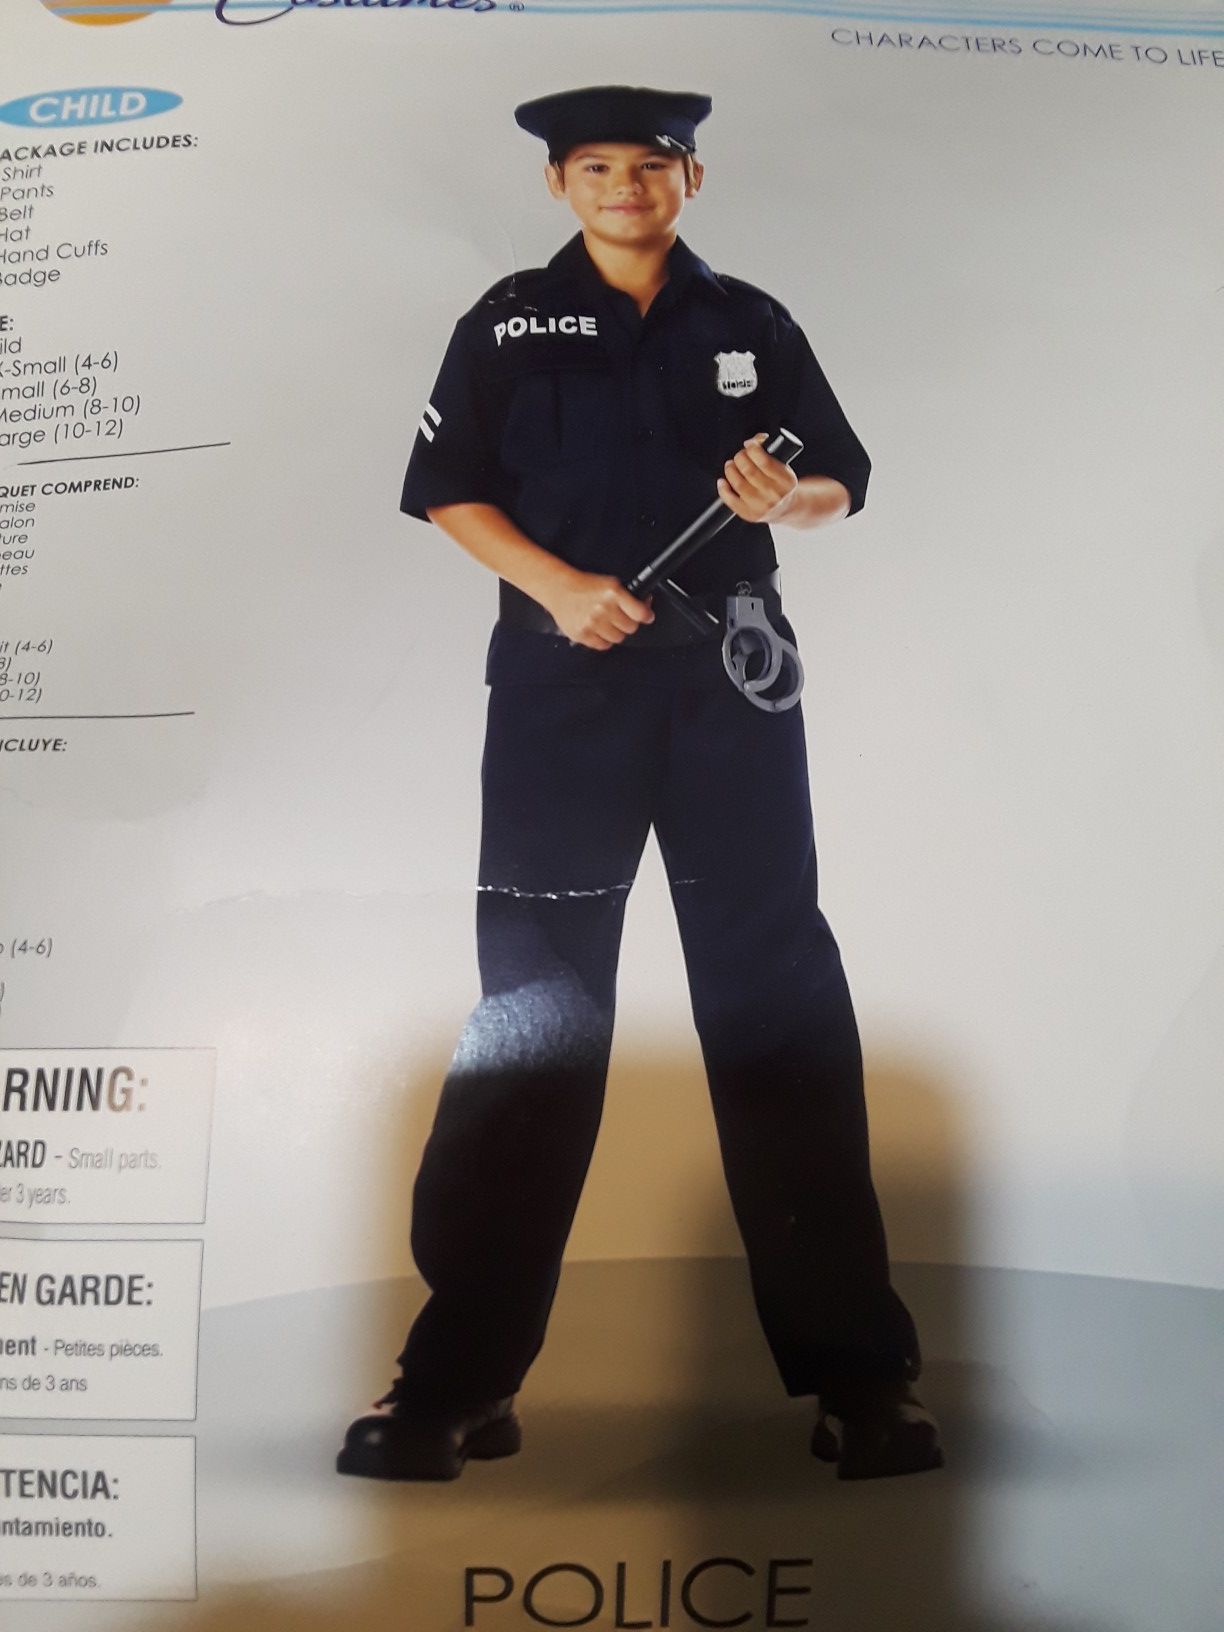 POLICE OFFICER COSTUME FOR BOYS. Size 10-12